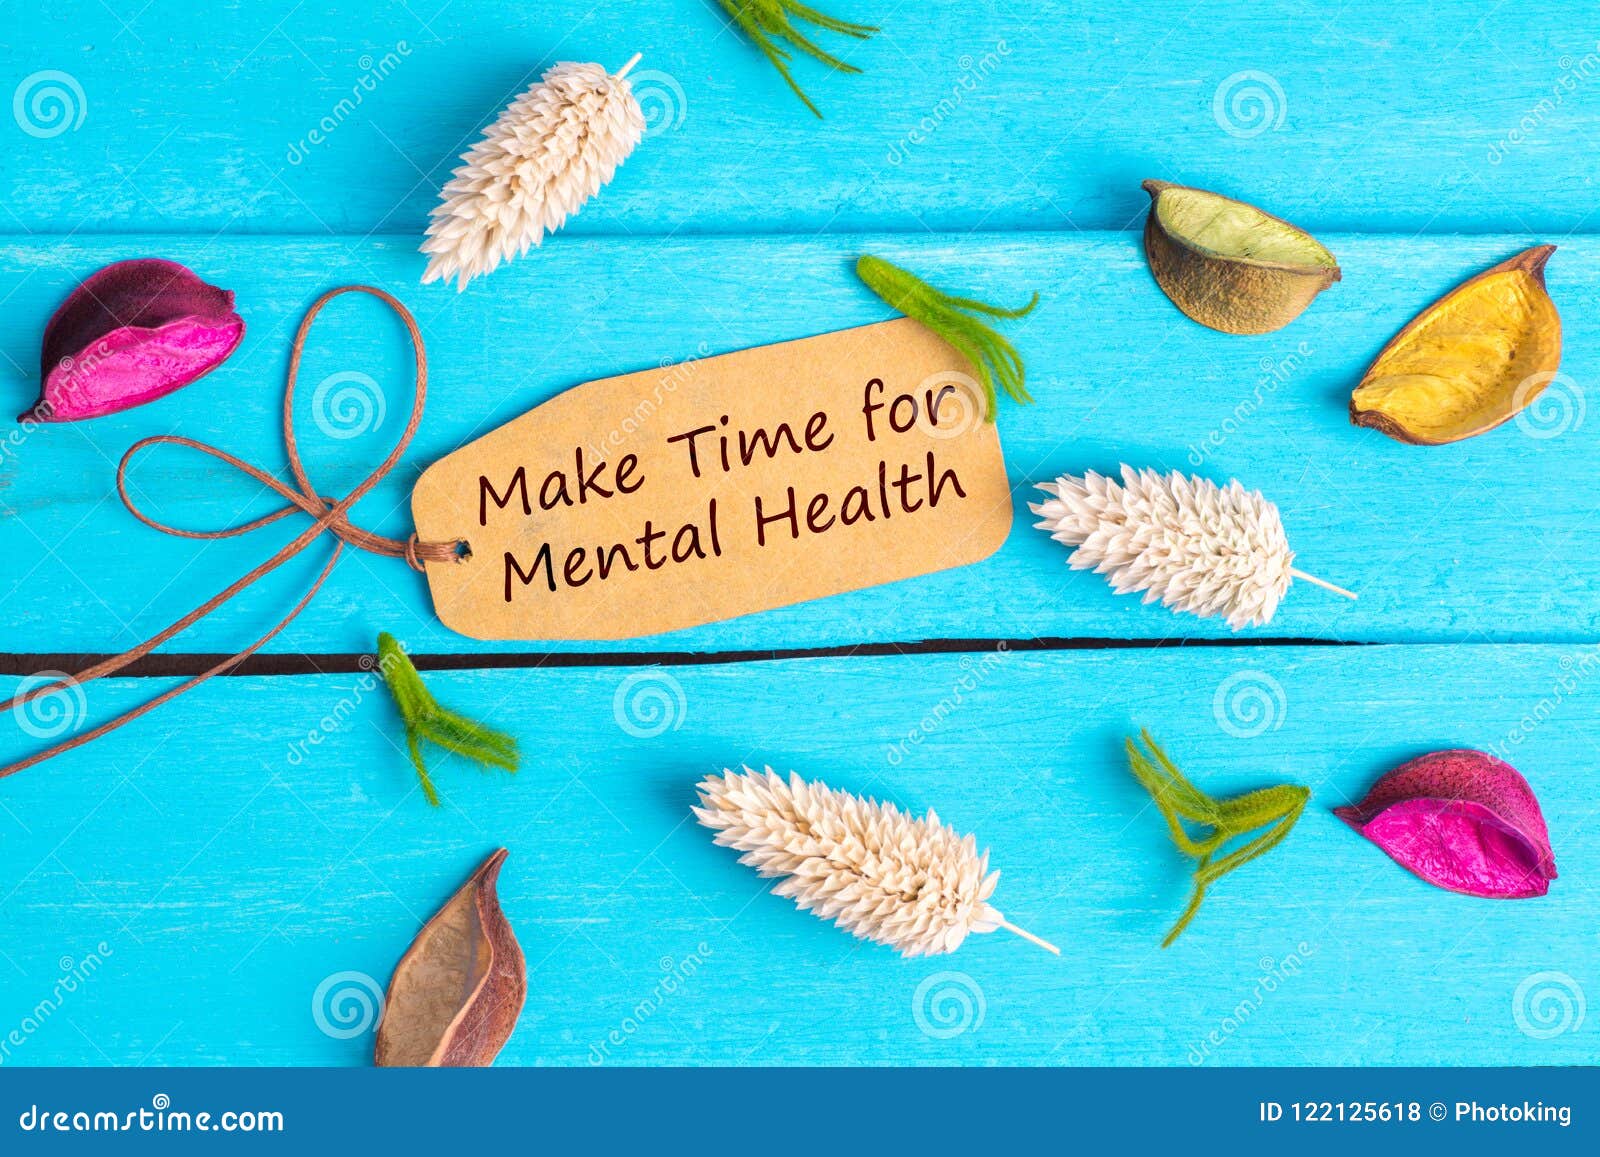 make time for mental health text on paper tag